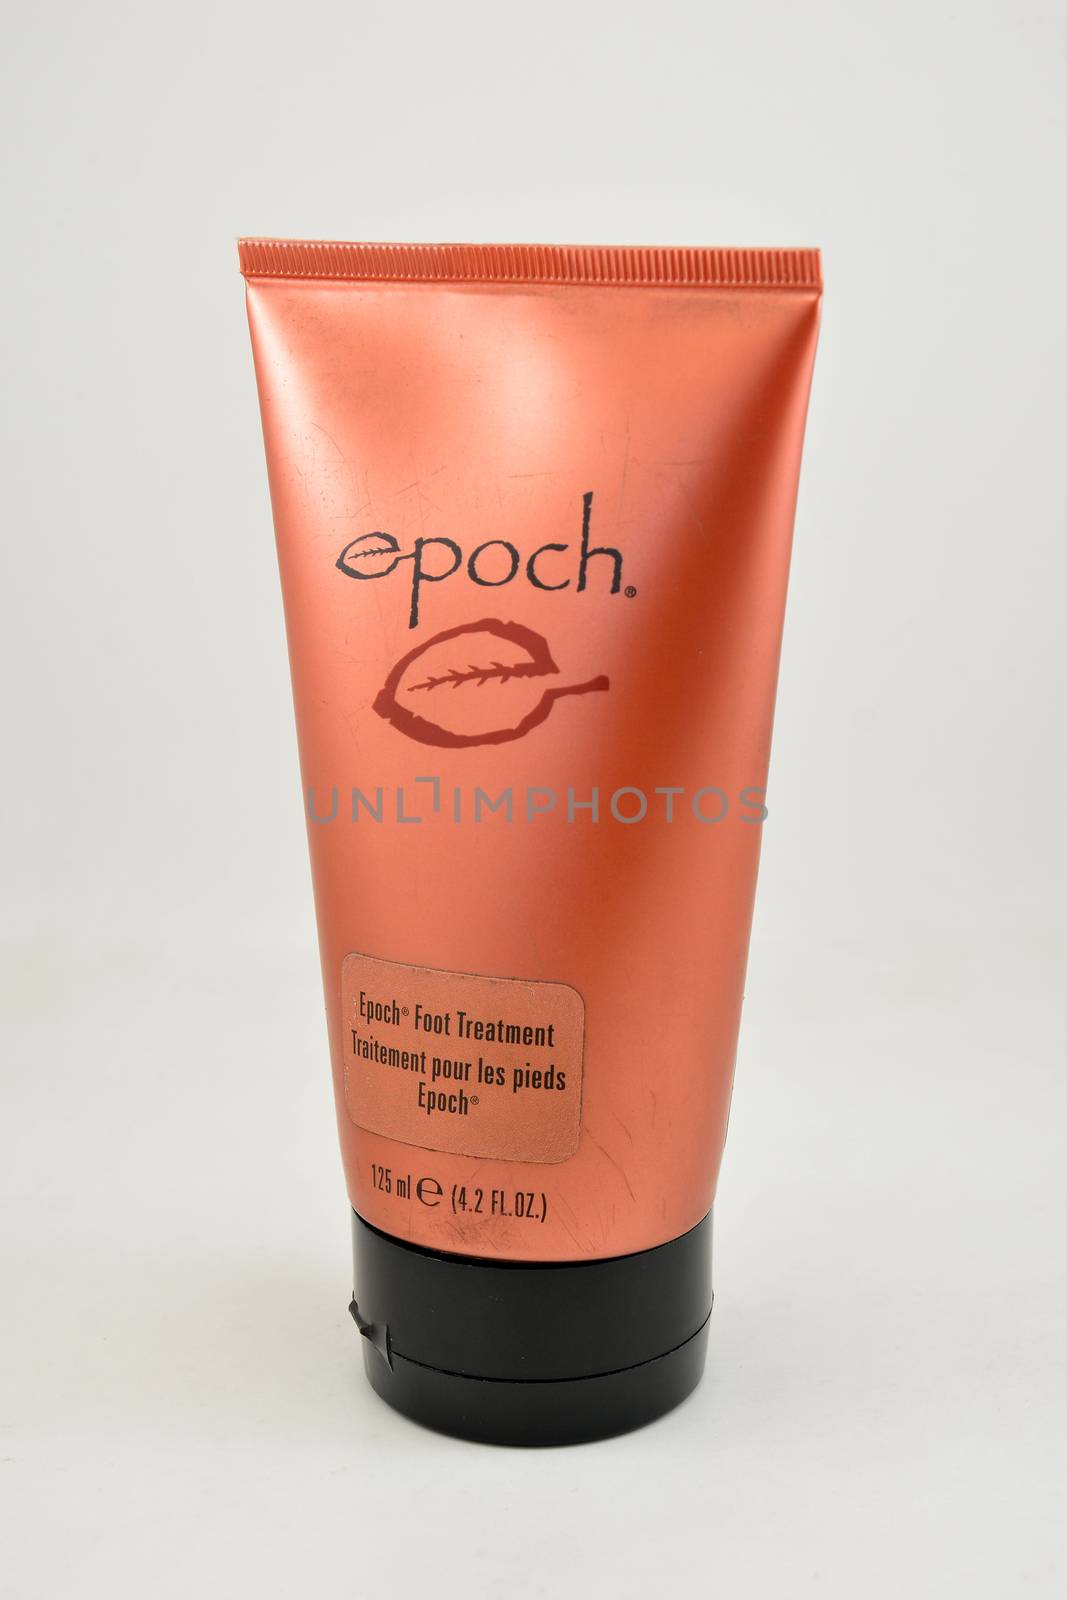 MANILA, PH - SEPT 10 - Epoch foot treatment squeeze tube on September 10, 2020 in Manila, Philippines.